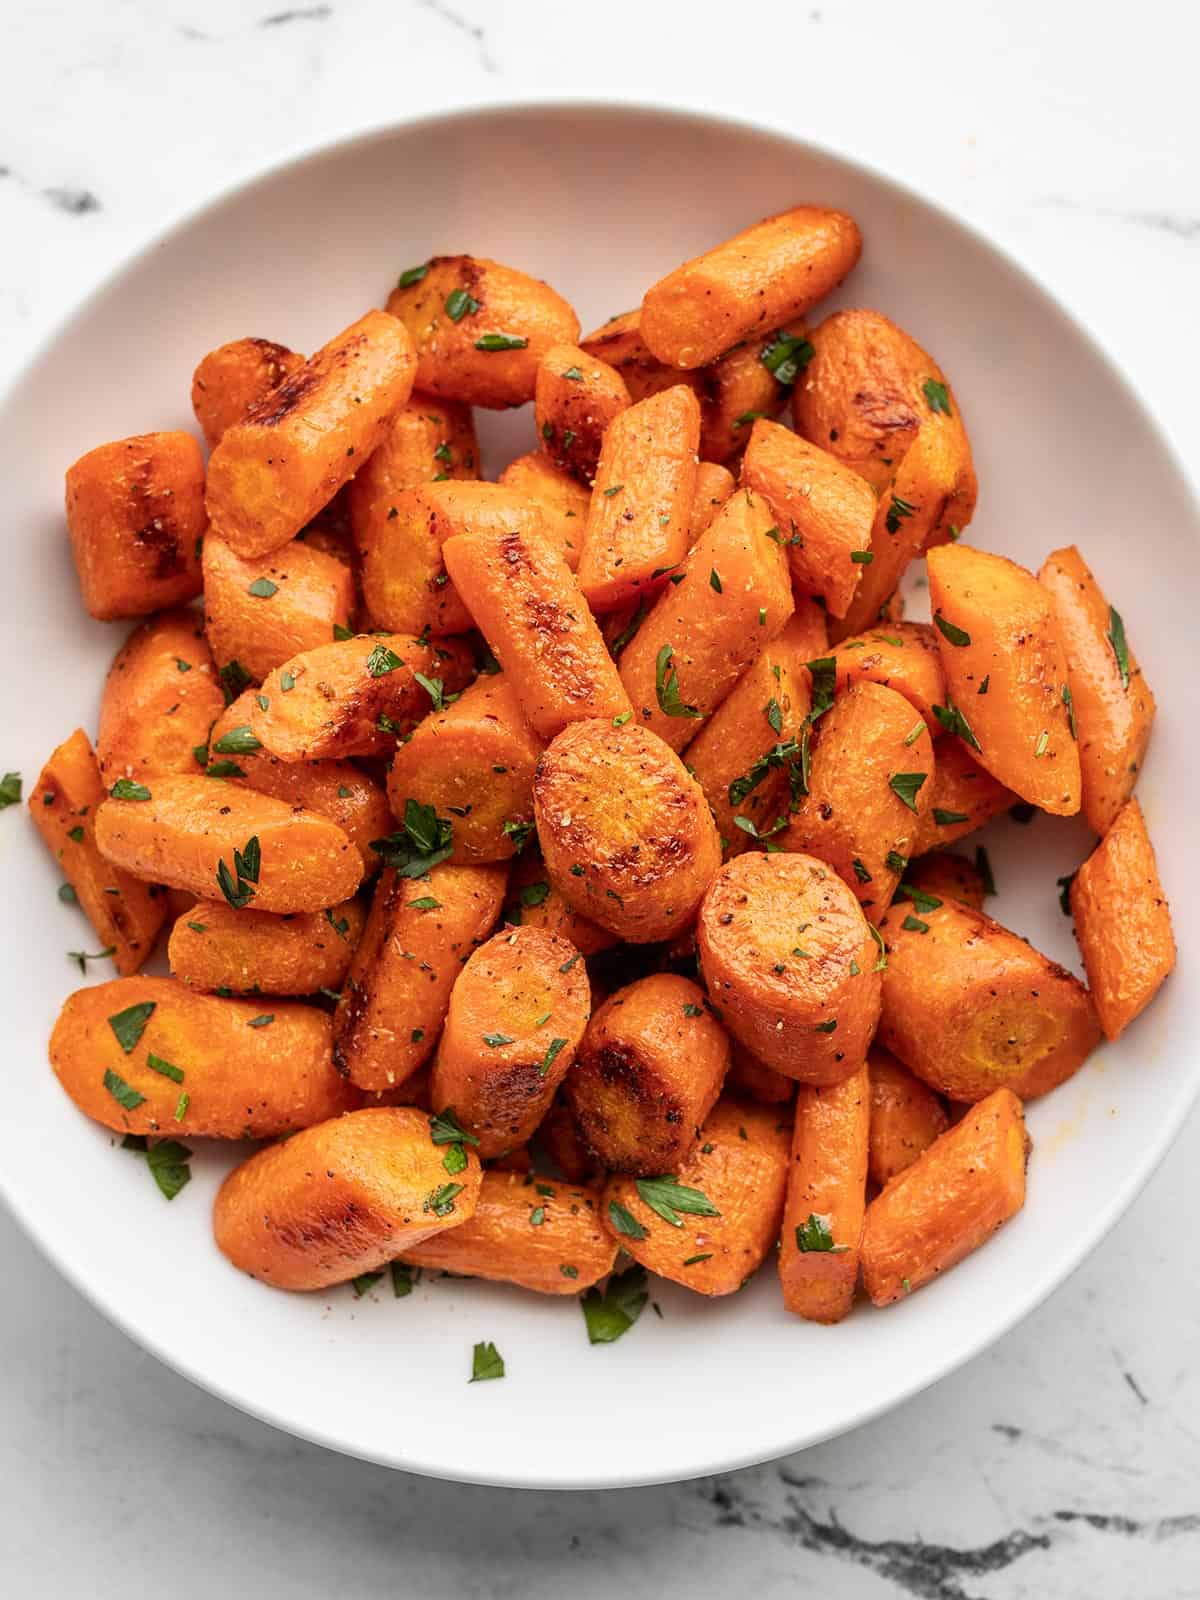 fried carrots in a bowl decorated with parsley.